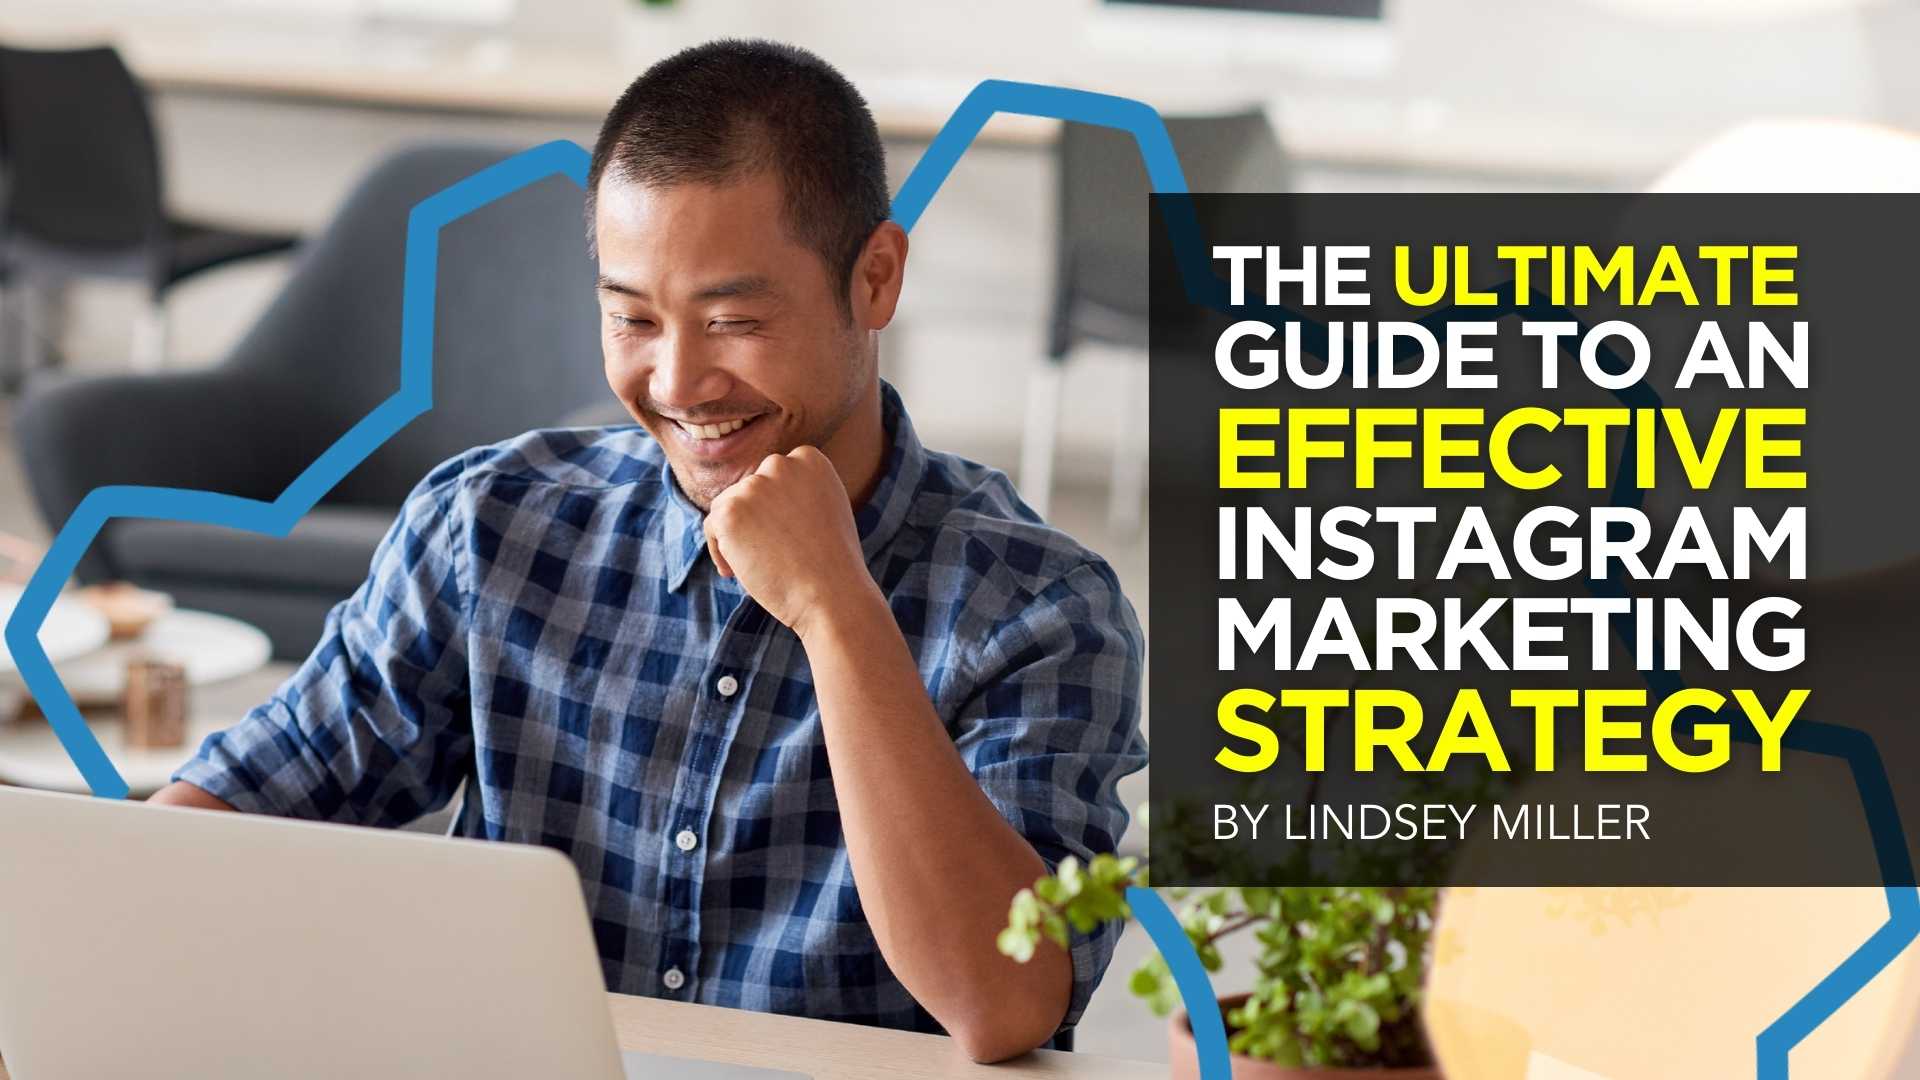 The Ultimate Guide to An Effective Instagram Marketing Strategy